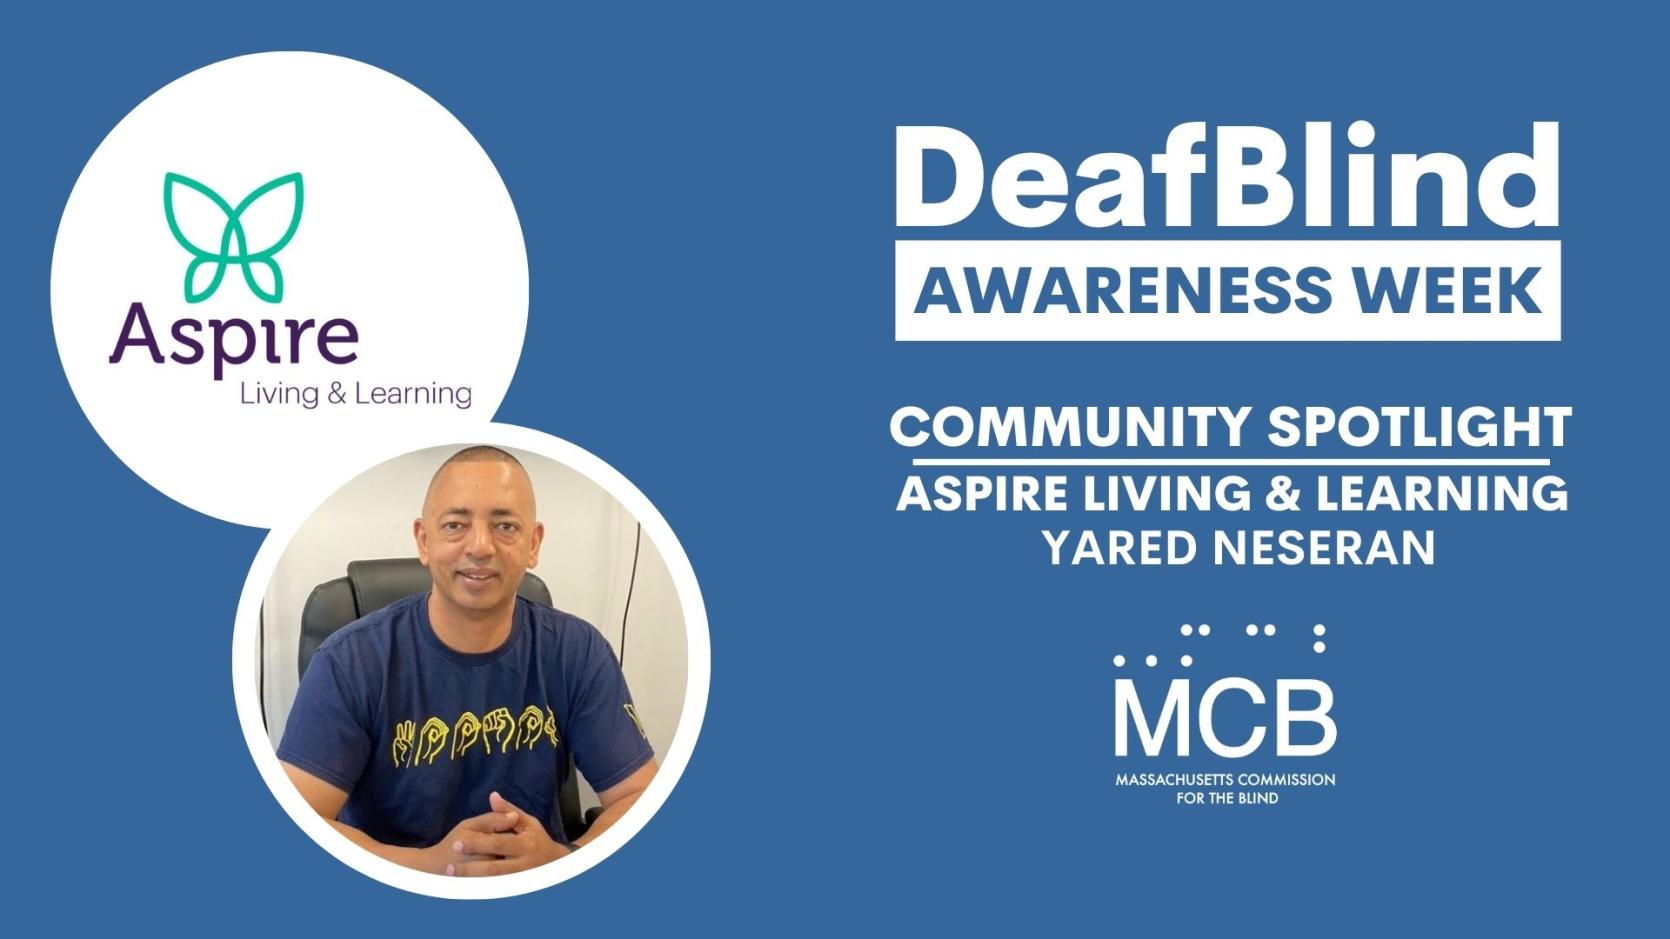 The Aspire Living & Learning logo and Yared Neseran's headshot with the text, DeafBlind Awareness Week, Community Spotlight, Aspire Living & Learning, Yared Neseran